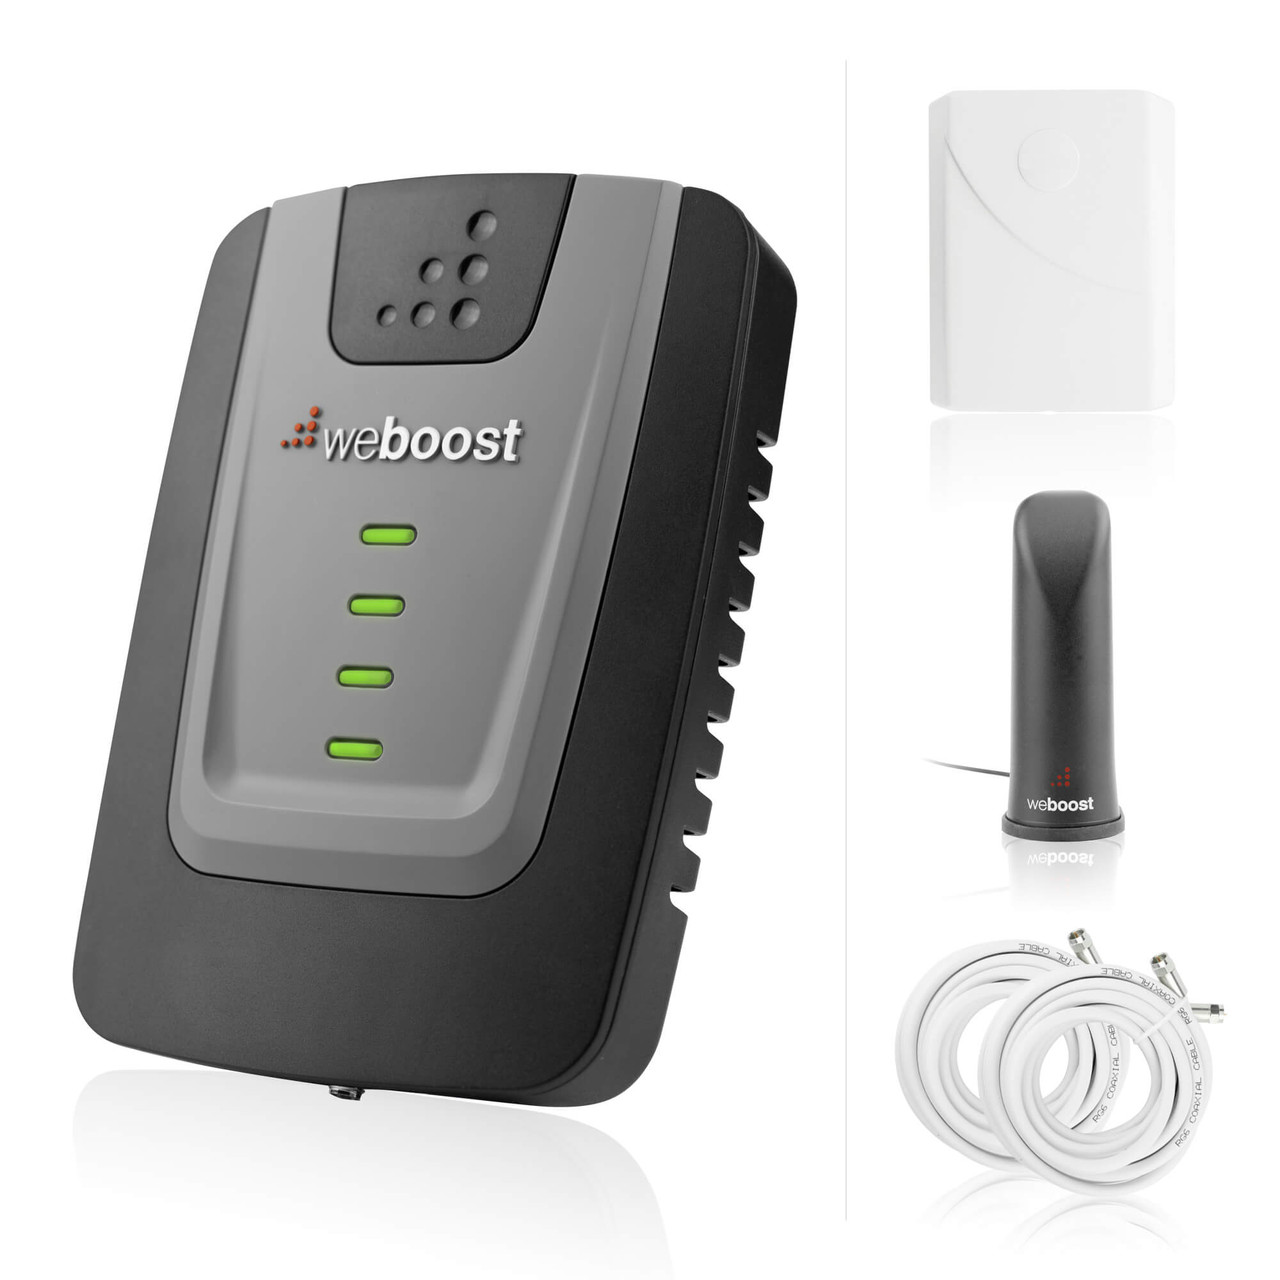 cell signal booster for home